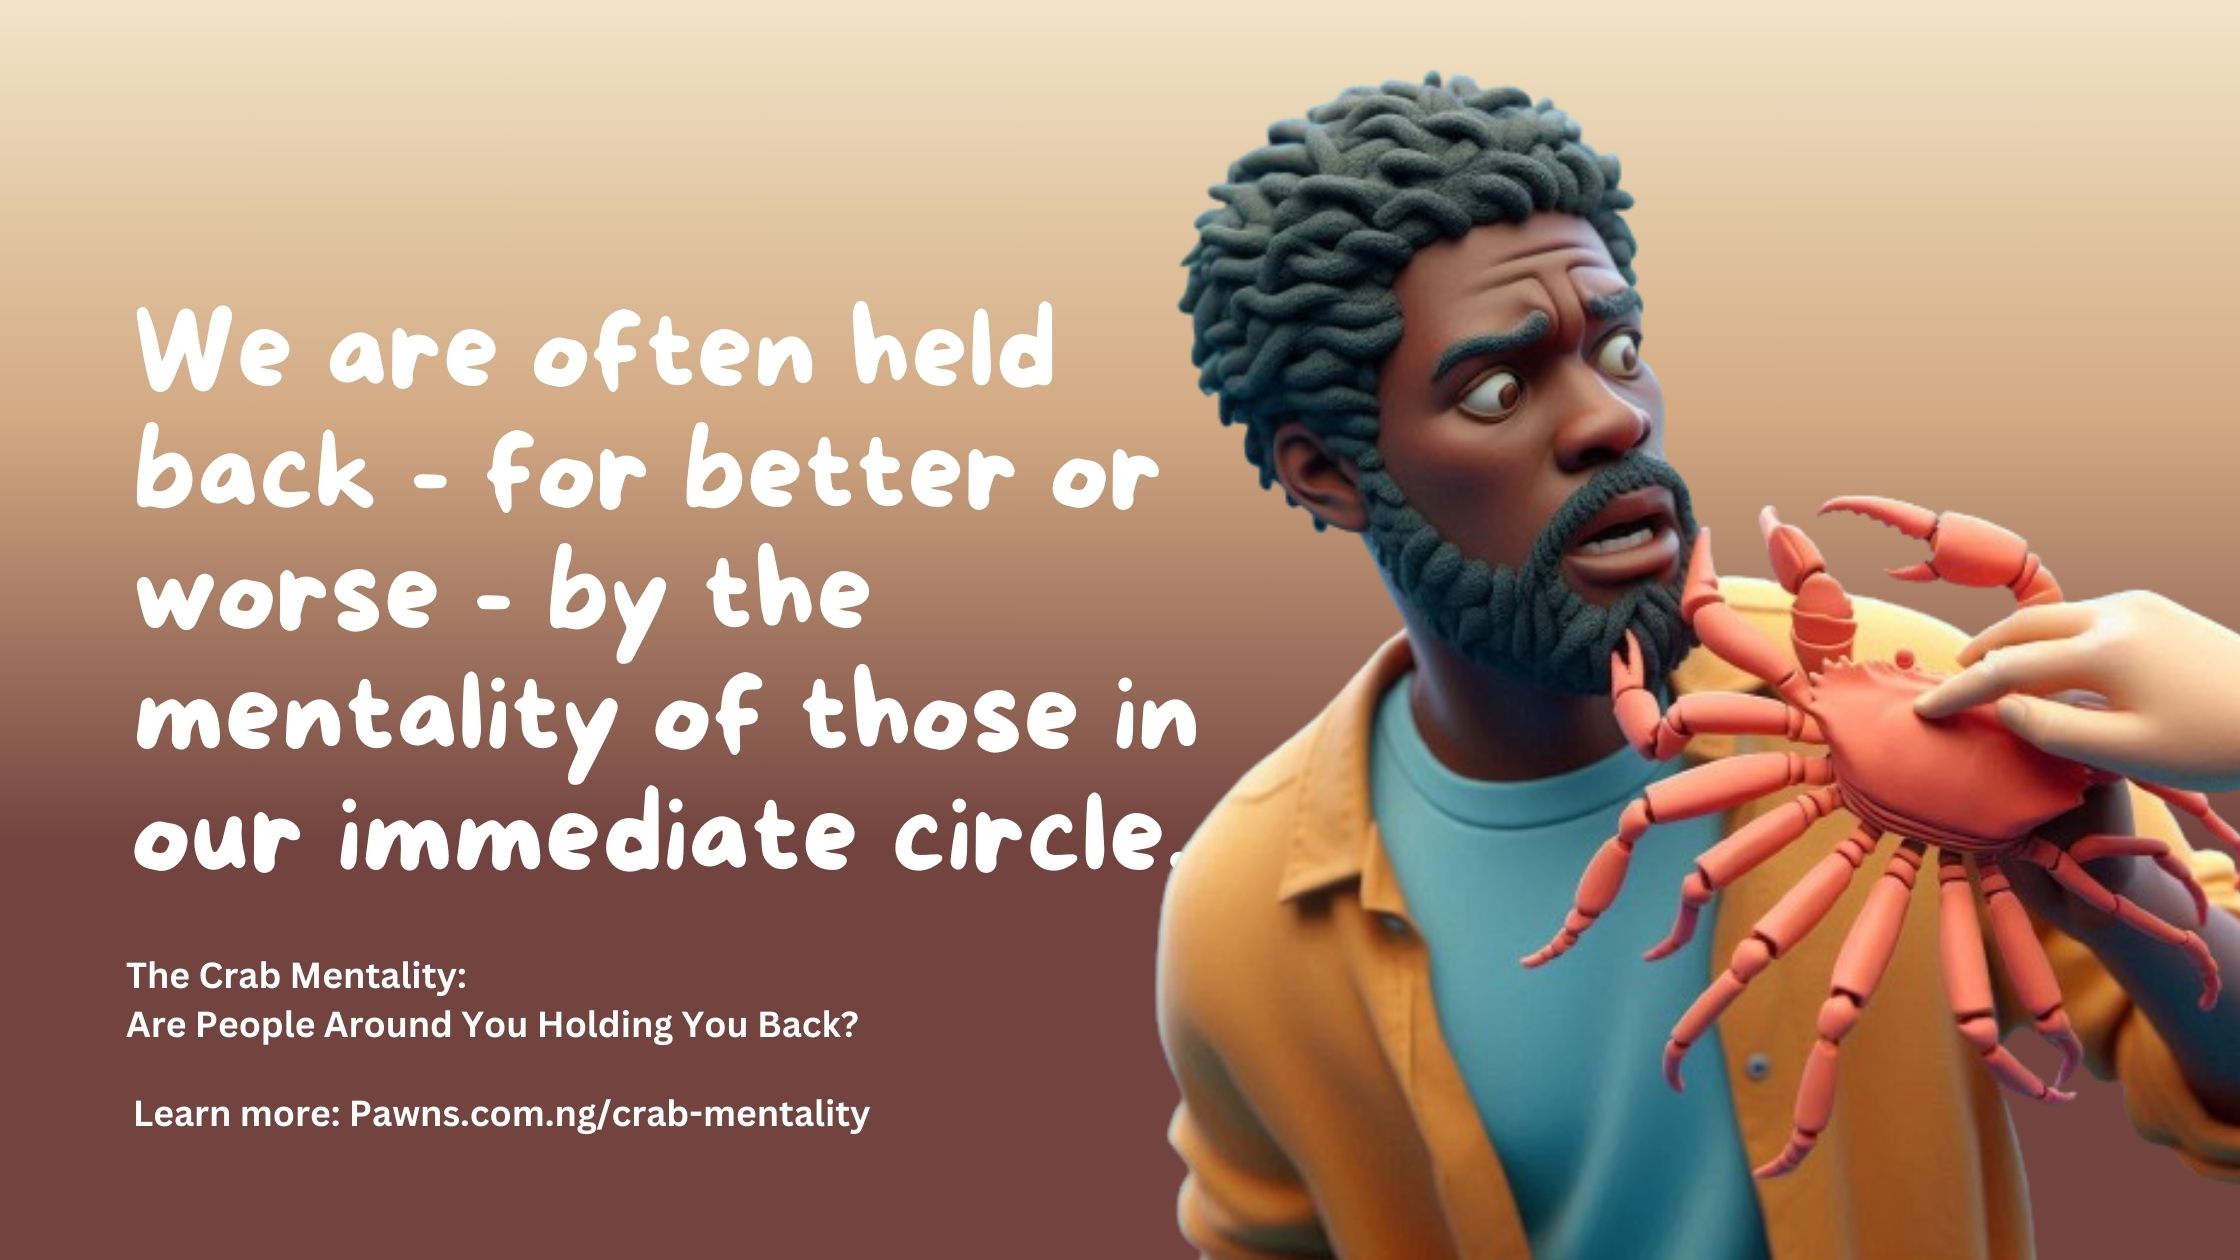 We are often held back - for better or worse - by the mentality of those in our immediate circle. The Crab Mentality Are People Around You Holding You Back